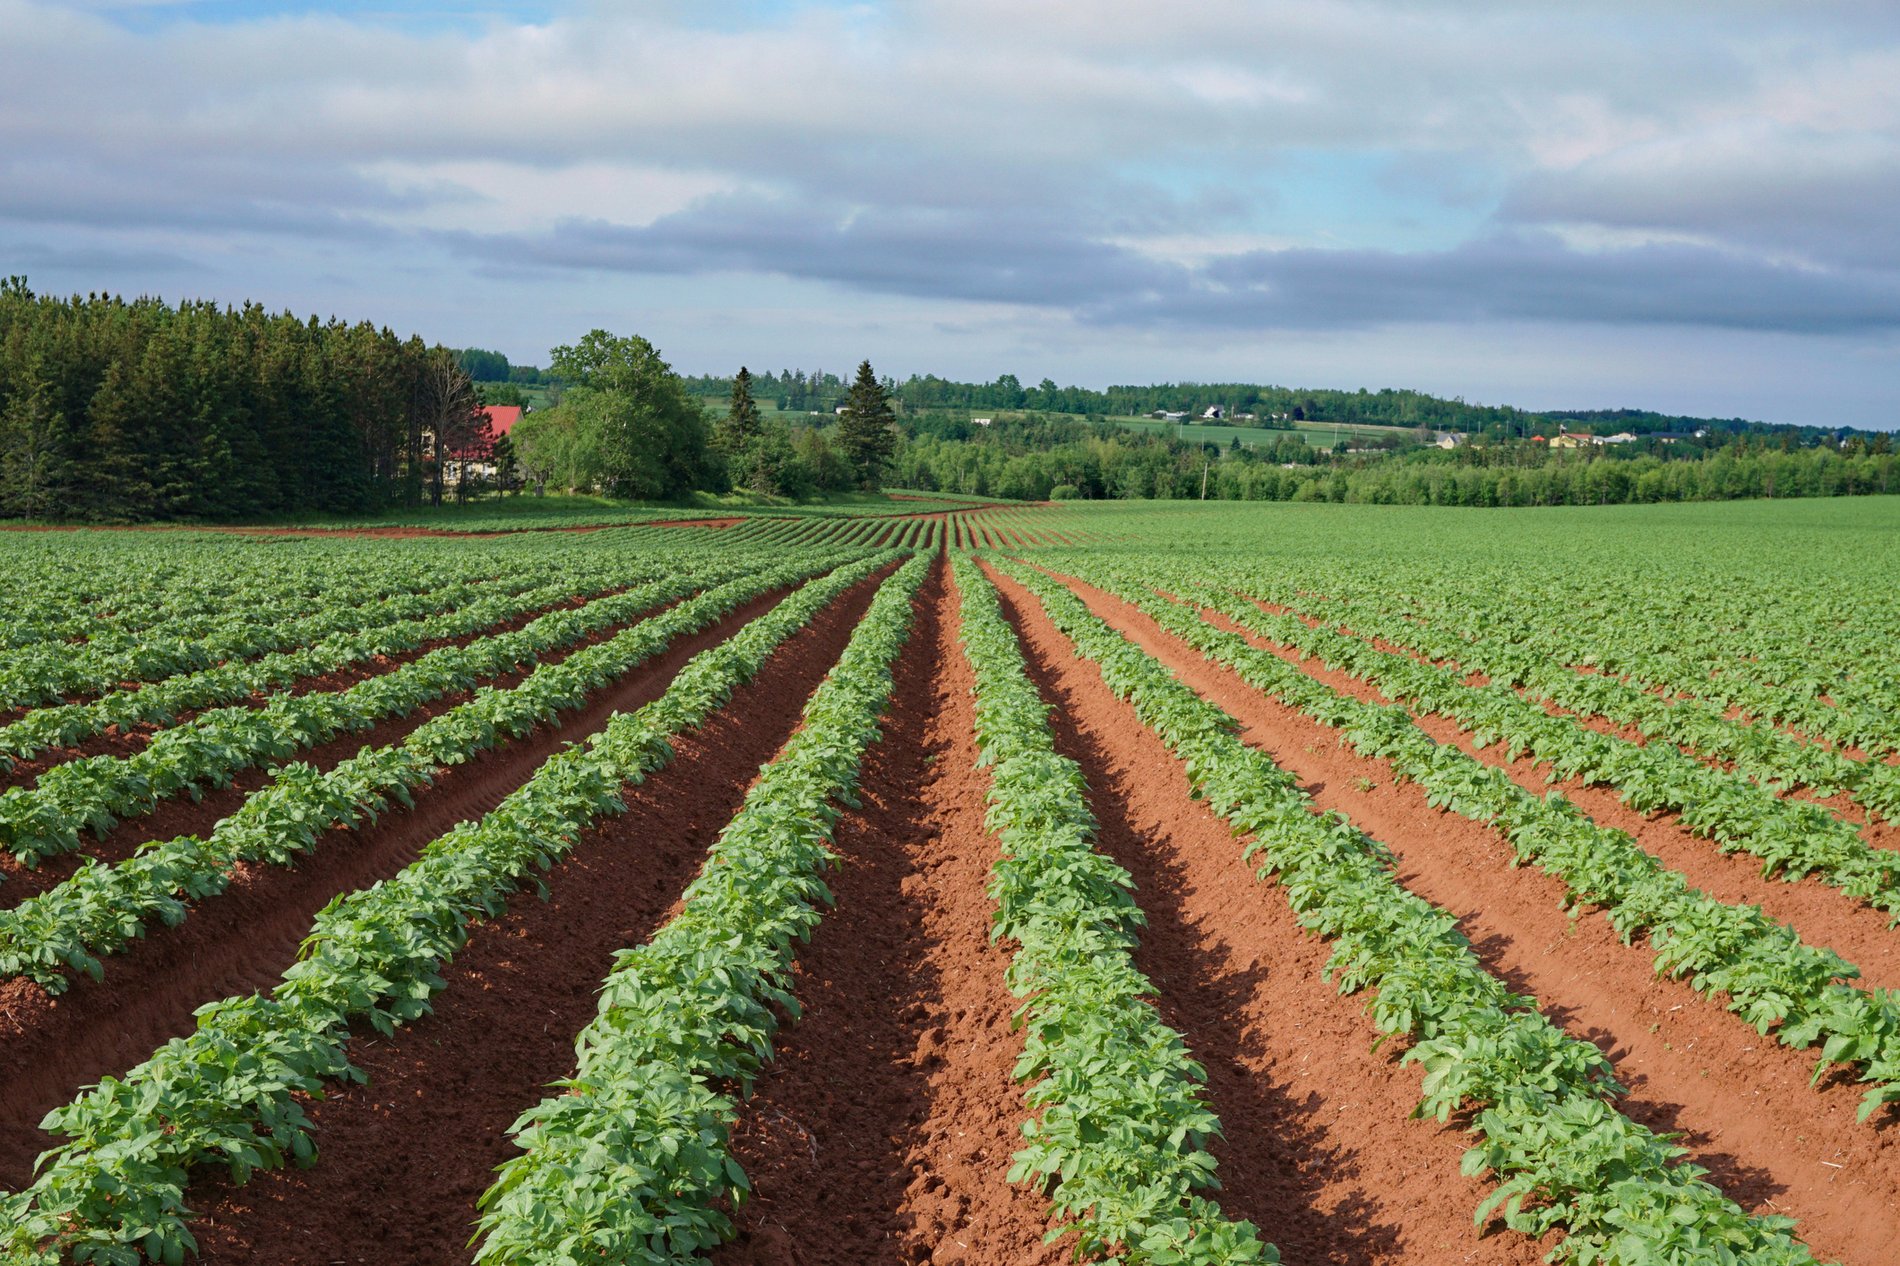 Rows of crops in red dirt.